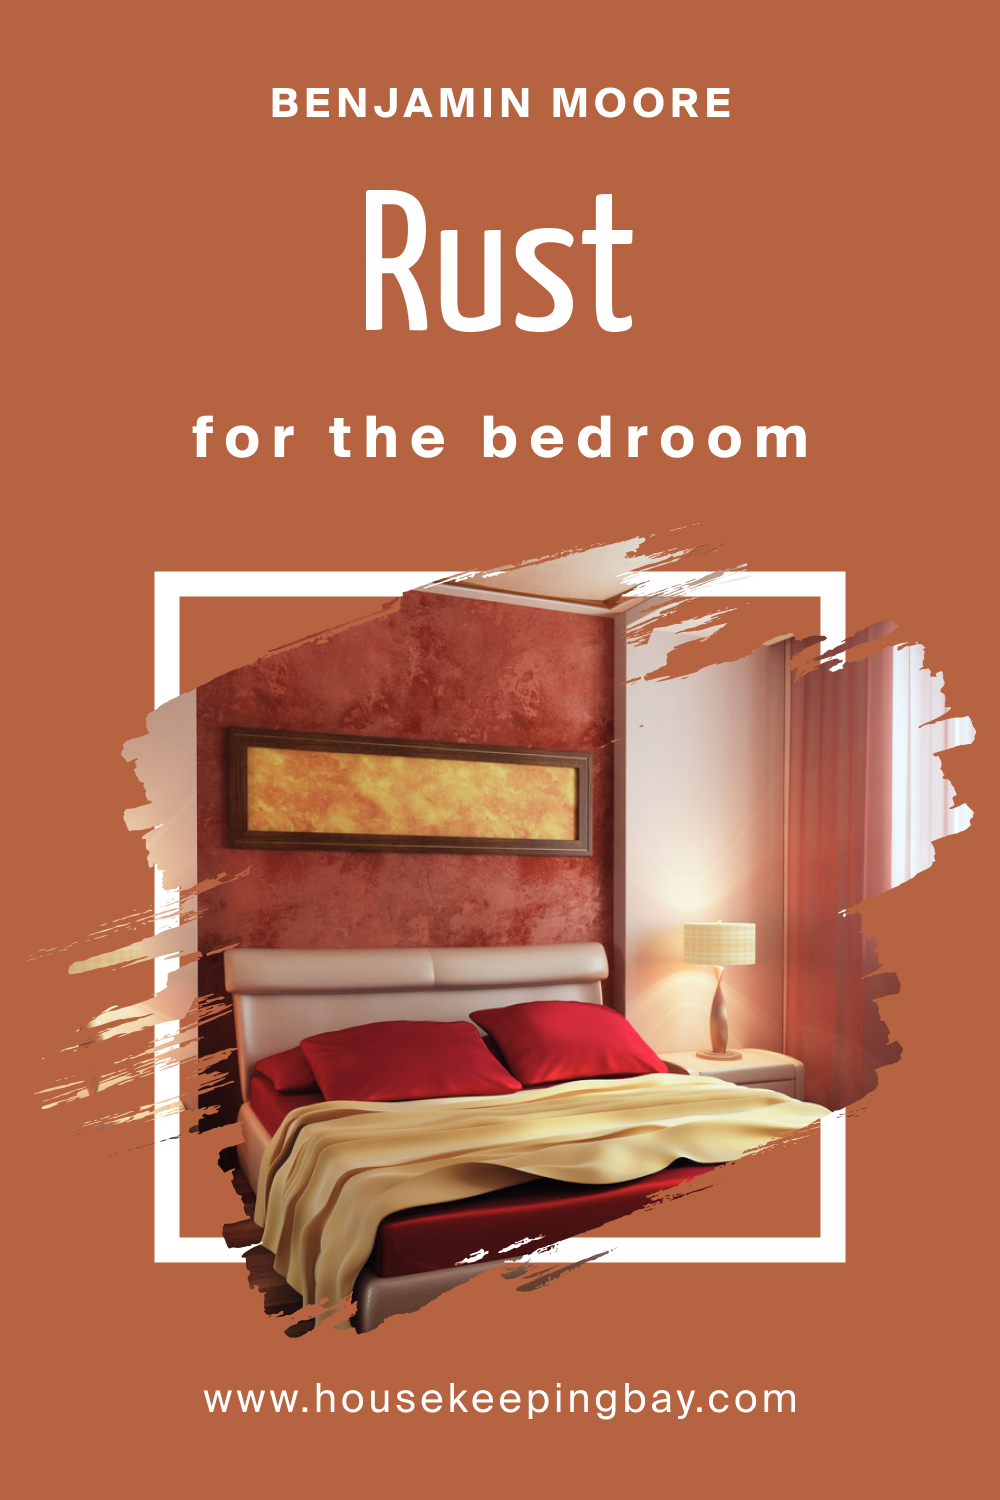 How to Use BM Rust 2175-30 in the Bedroom?